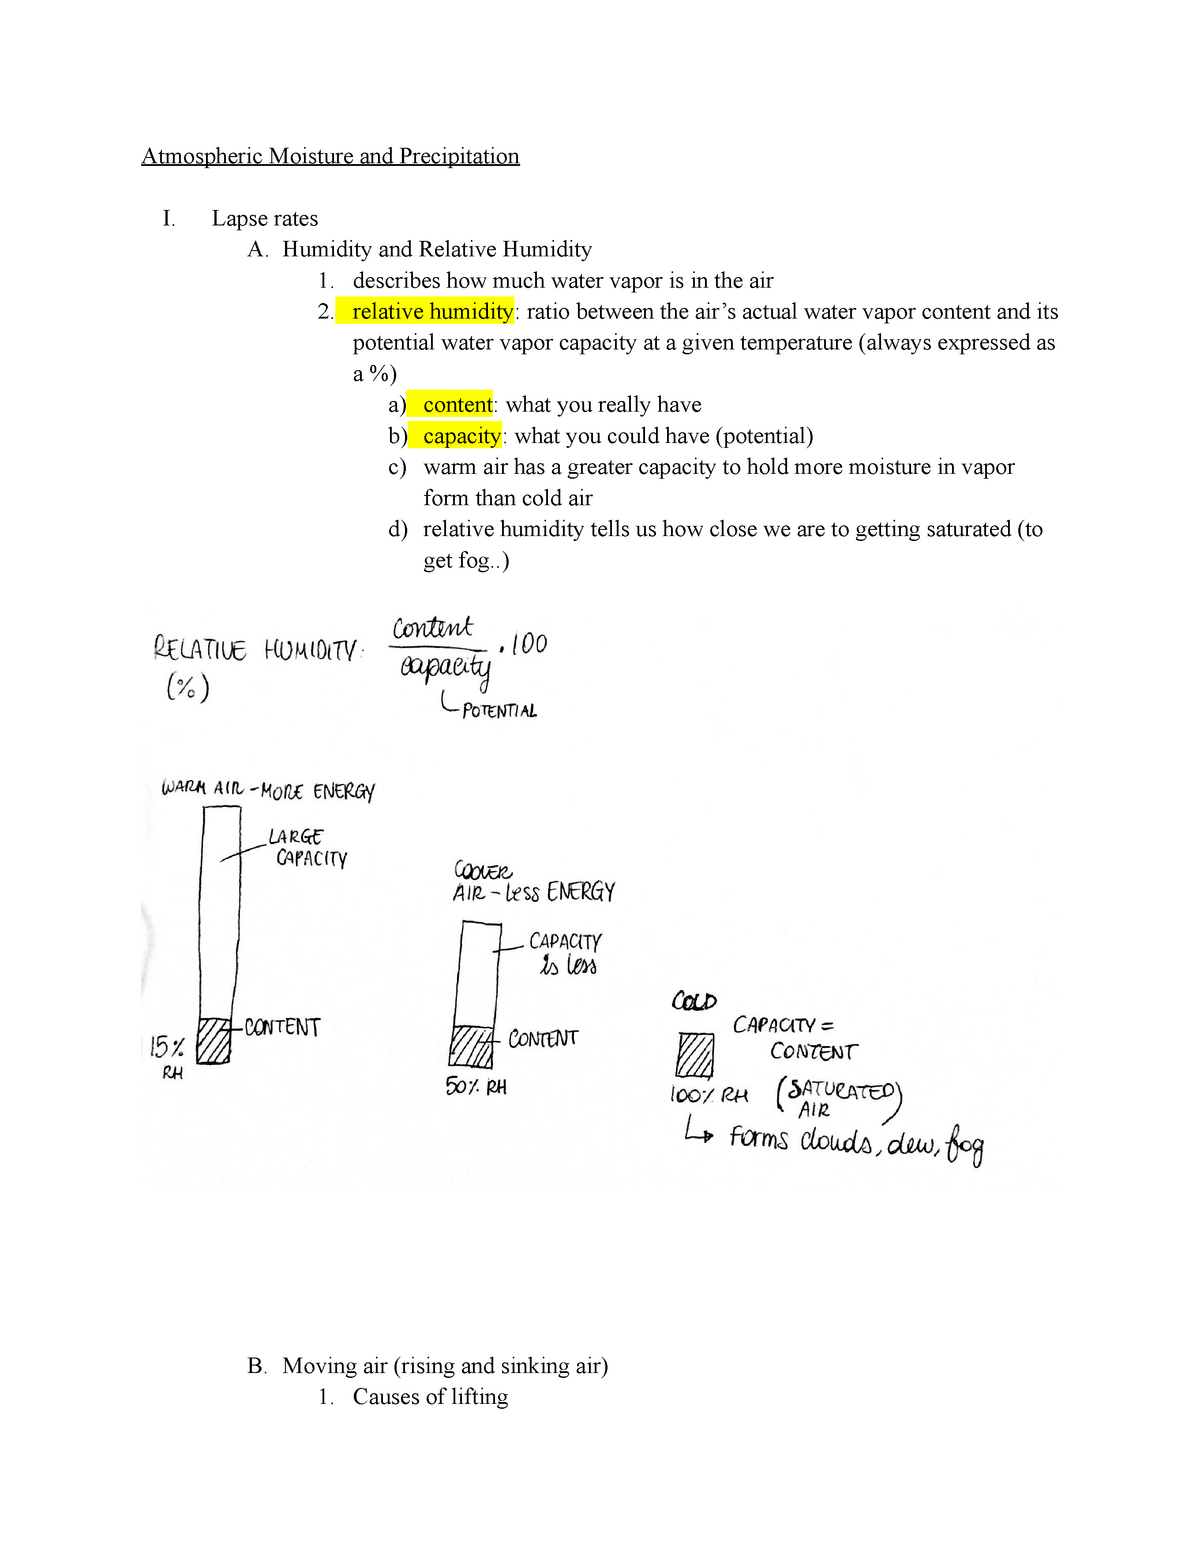 Week 7 - 10 21 - Lecture notes 7 - Atmospheric Moisture and ...